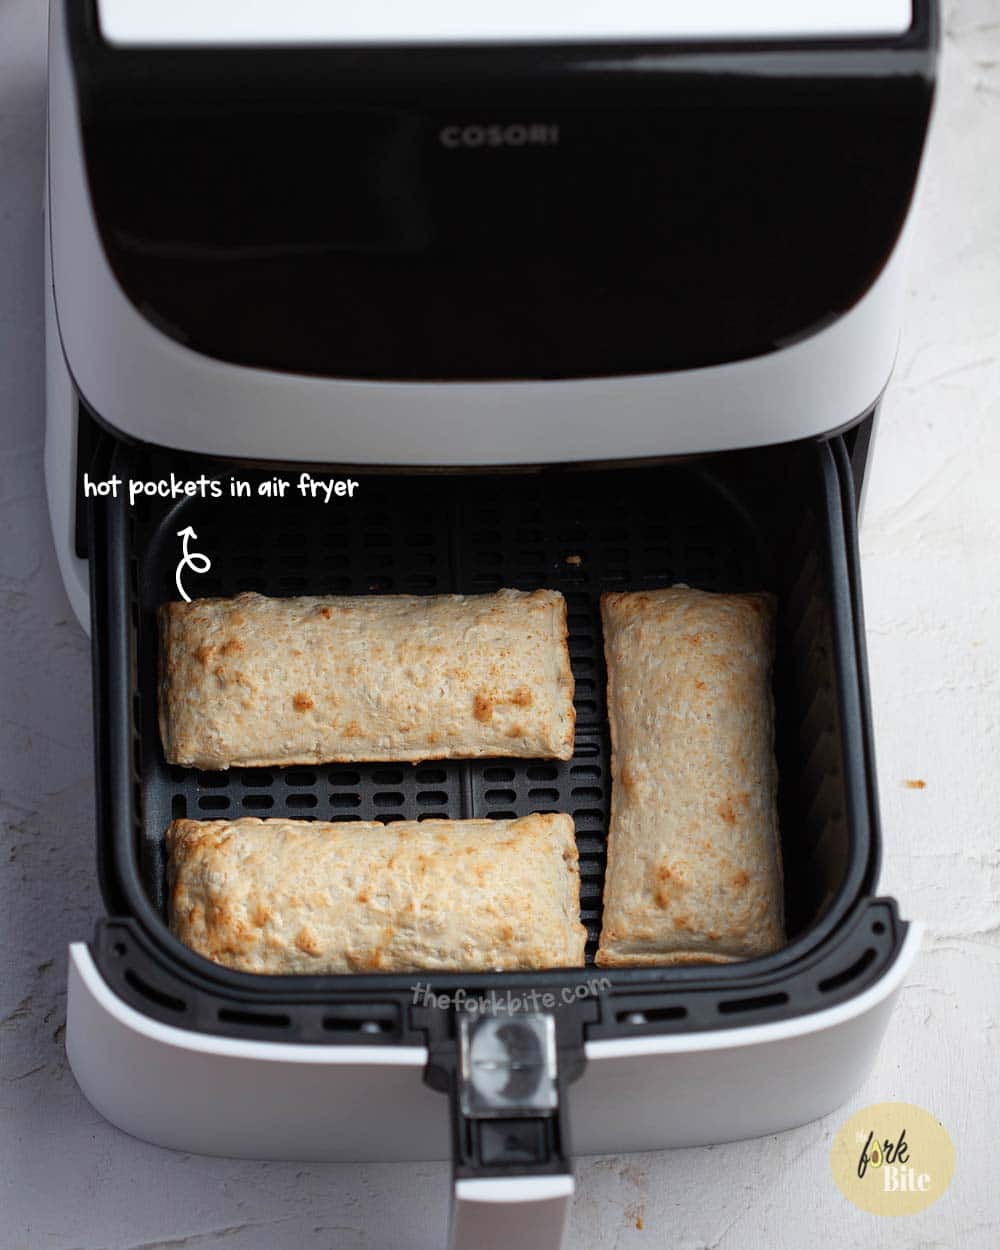 Now and again, we fancy something to eat that is fast and simple to prepare. Frozen Hot Pockets are just the job. All it takes is 13 minutes (or less if you take my shortcut instructions), and you’ve got the perfect snack.